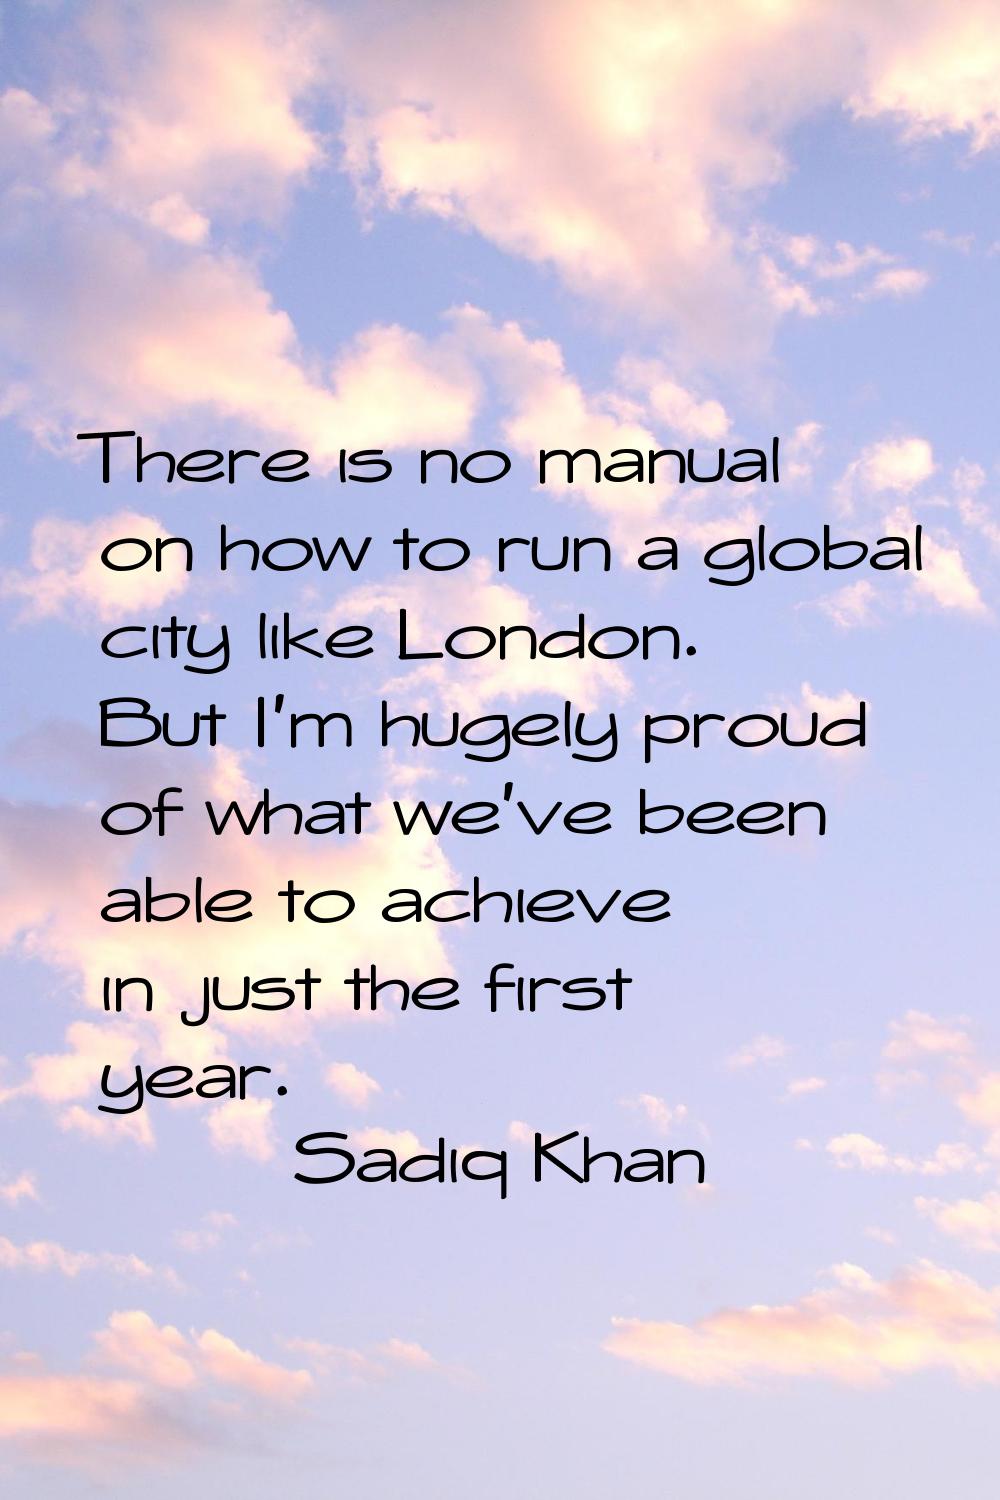 There is no manual on how to run a global city like London. But I'm hugely proud of what we've been